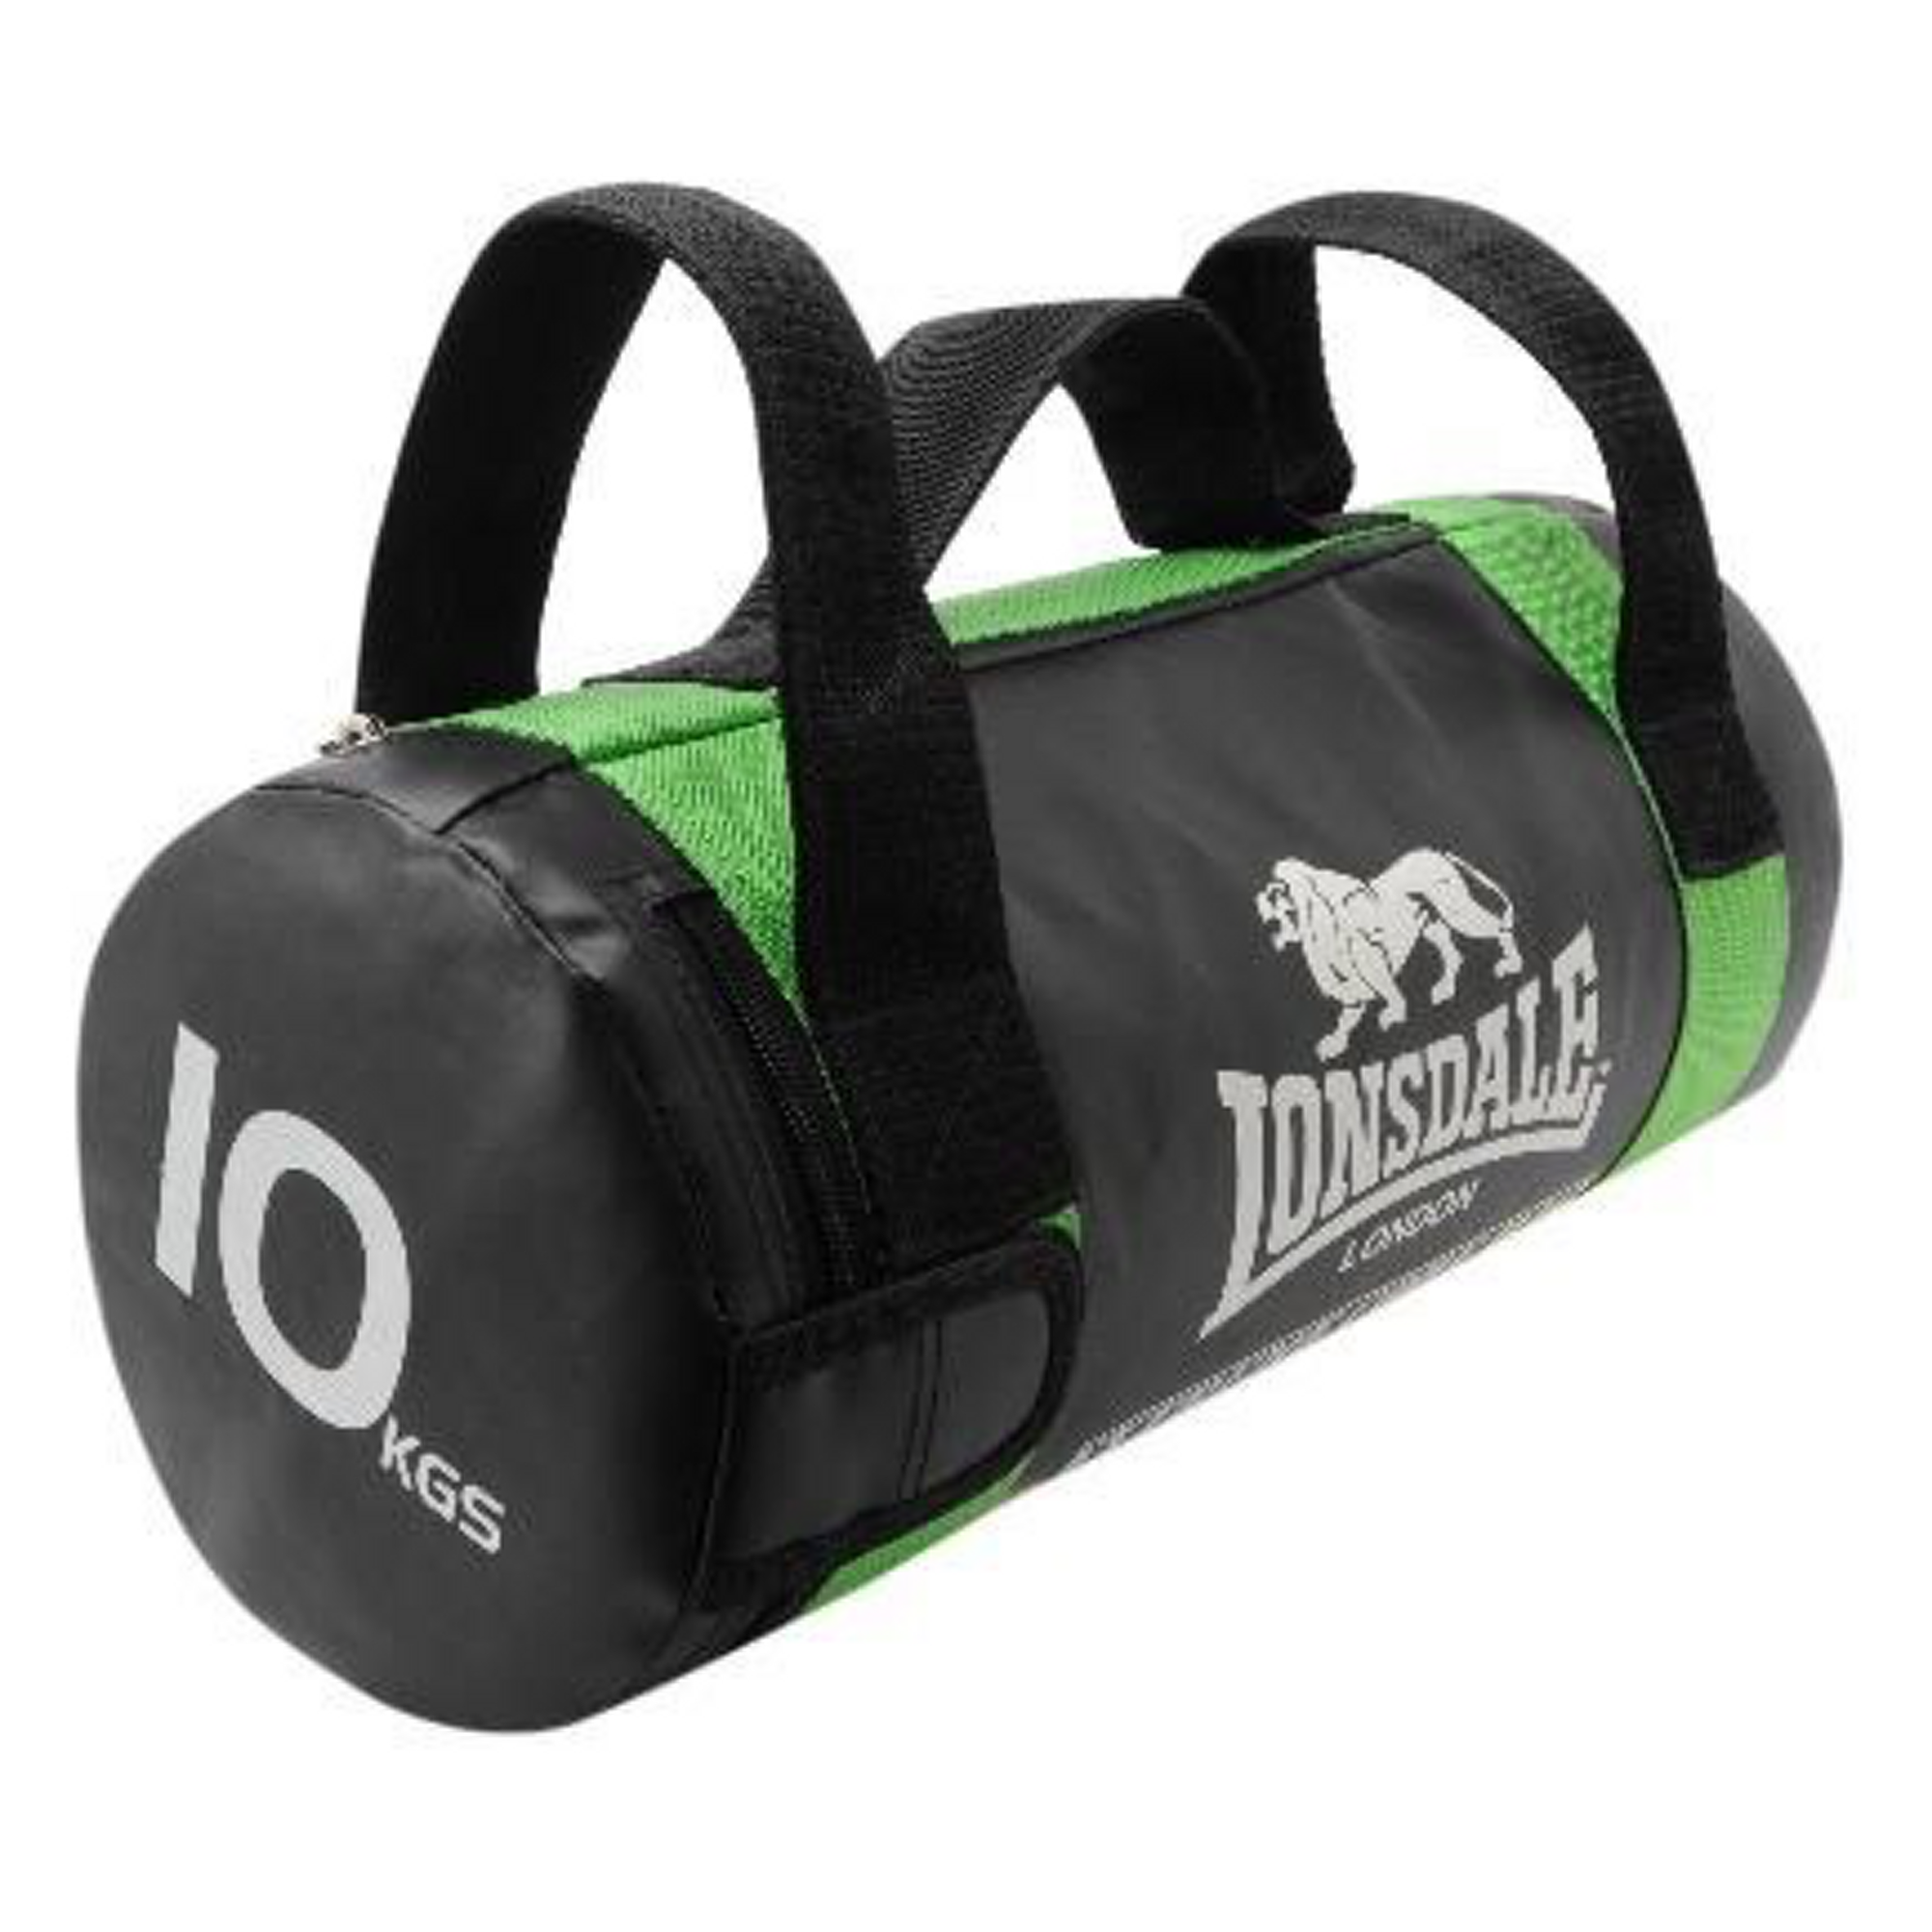 Lonsdale Extreme Core Bag 10kg Green